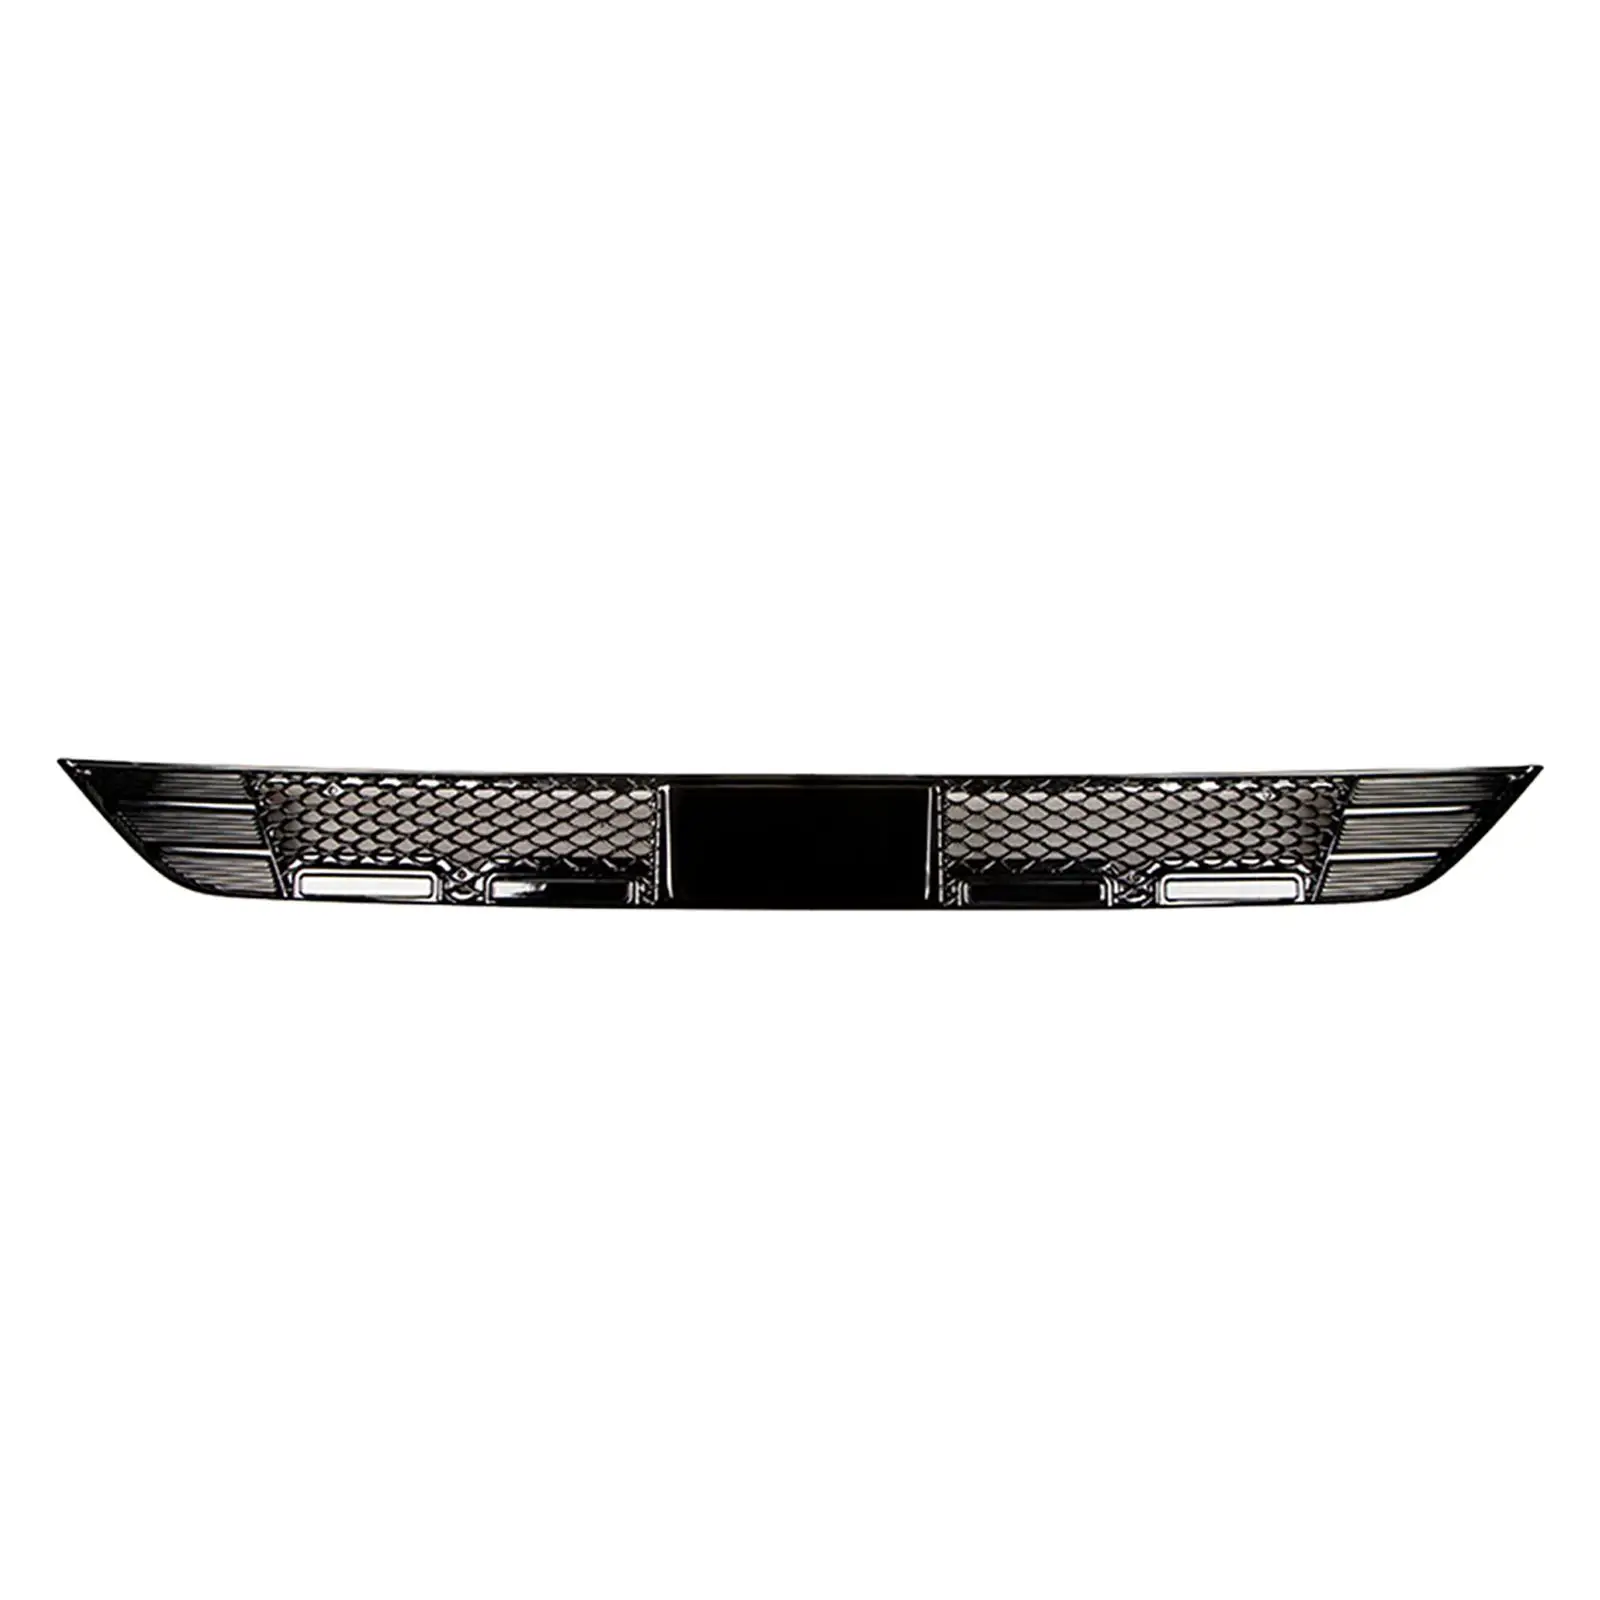 Auto Front Grill Mesh Grille Cover Replacement for Byd Atto 3 Yuan Plus